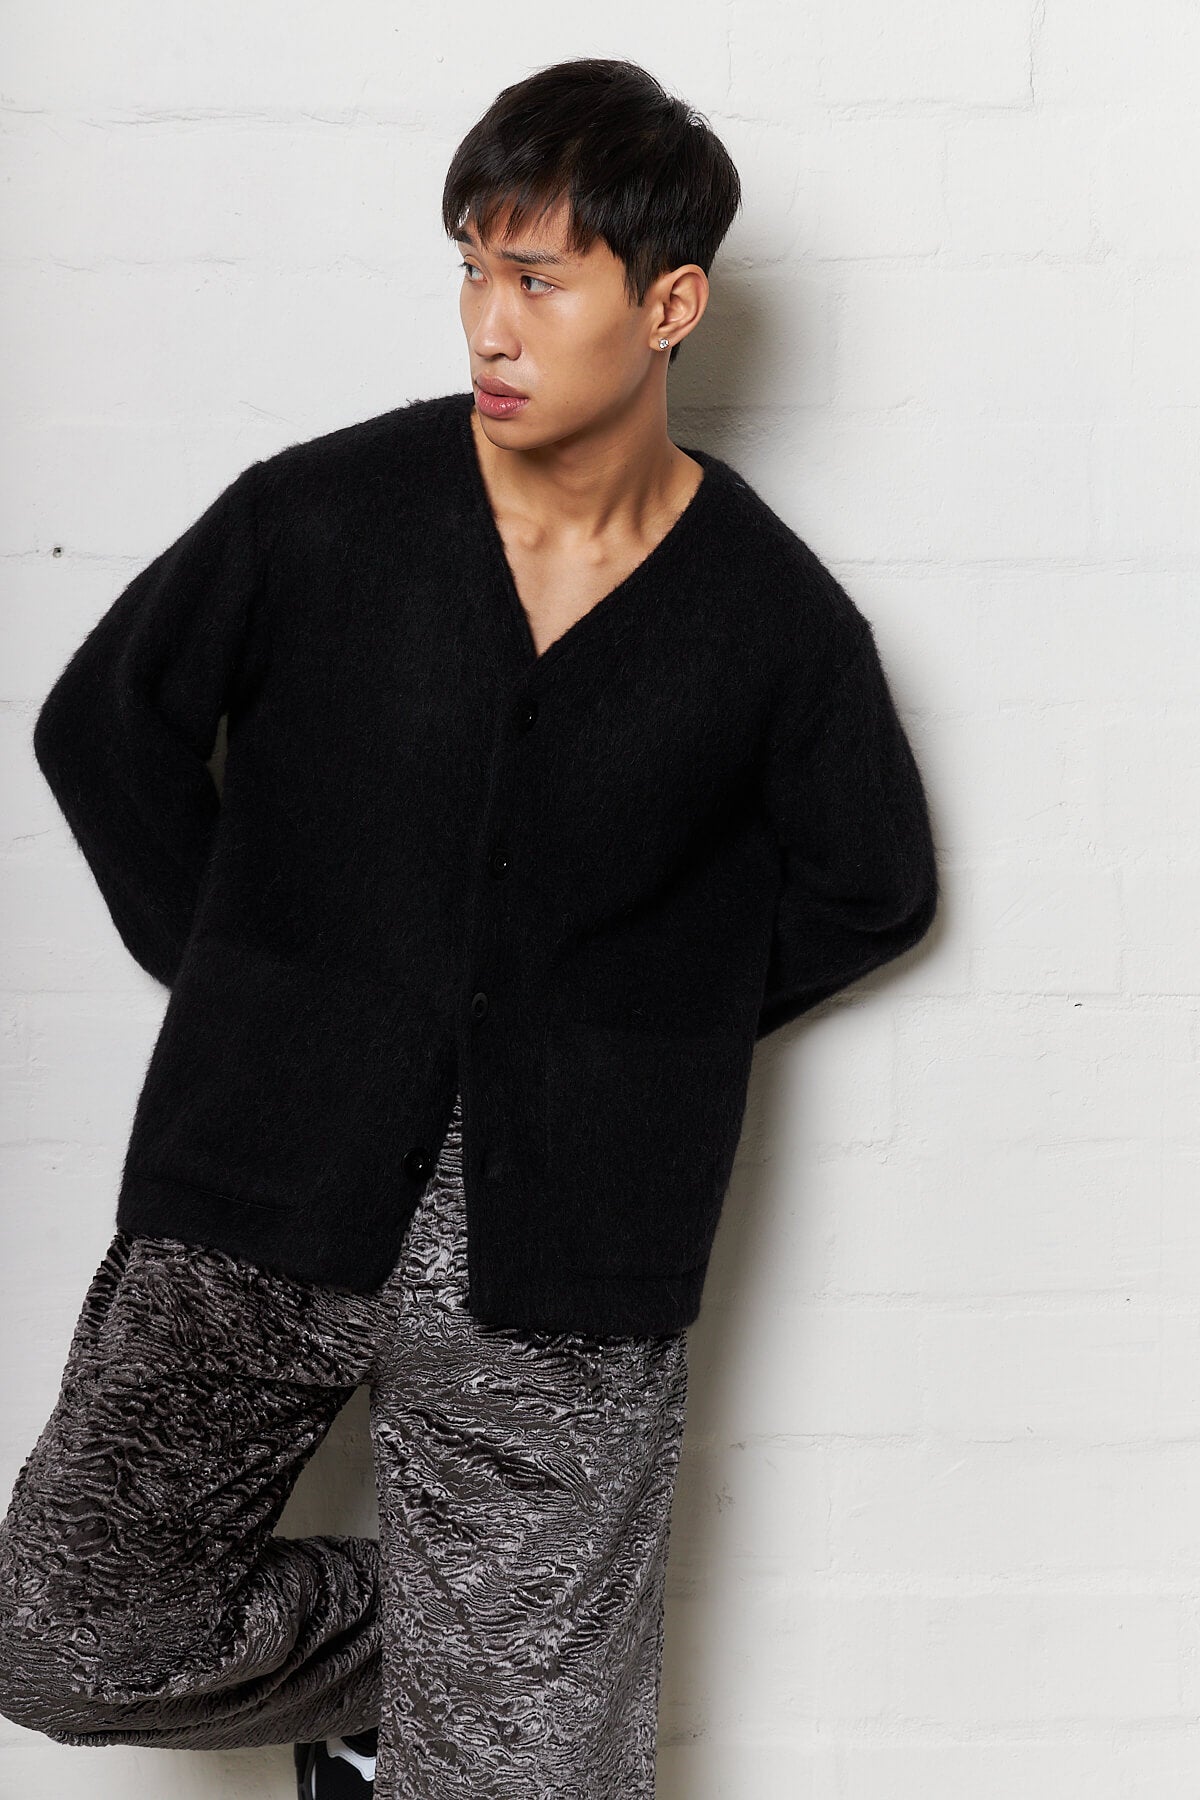 Shop Our Legacy Black Mohair Cardigan at The Wasted Hour – wasted